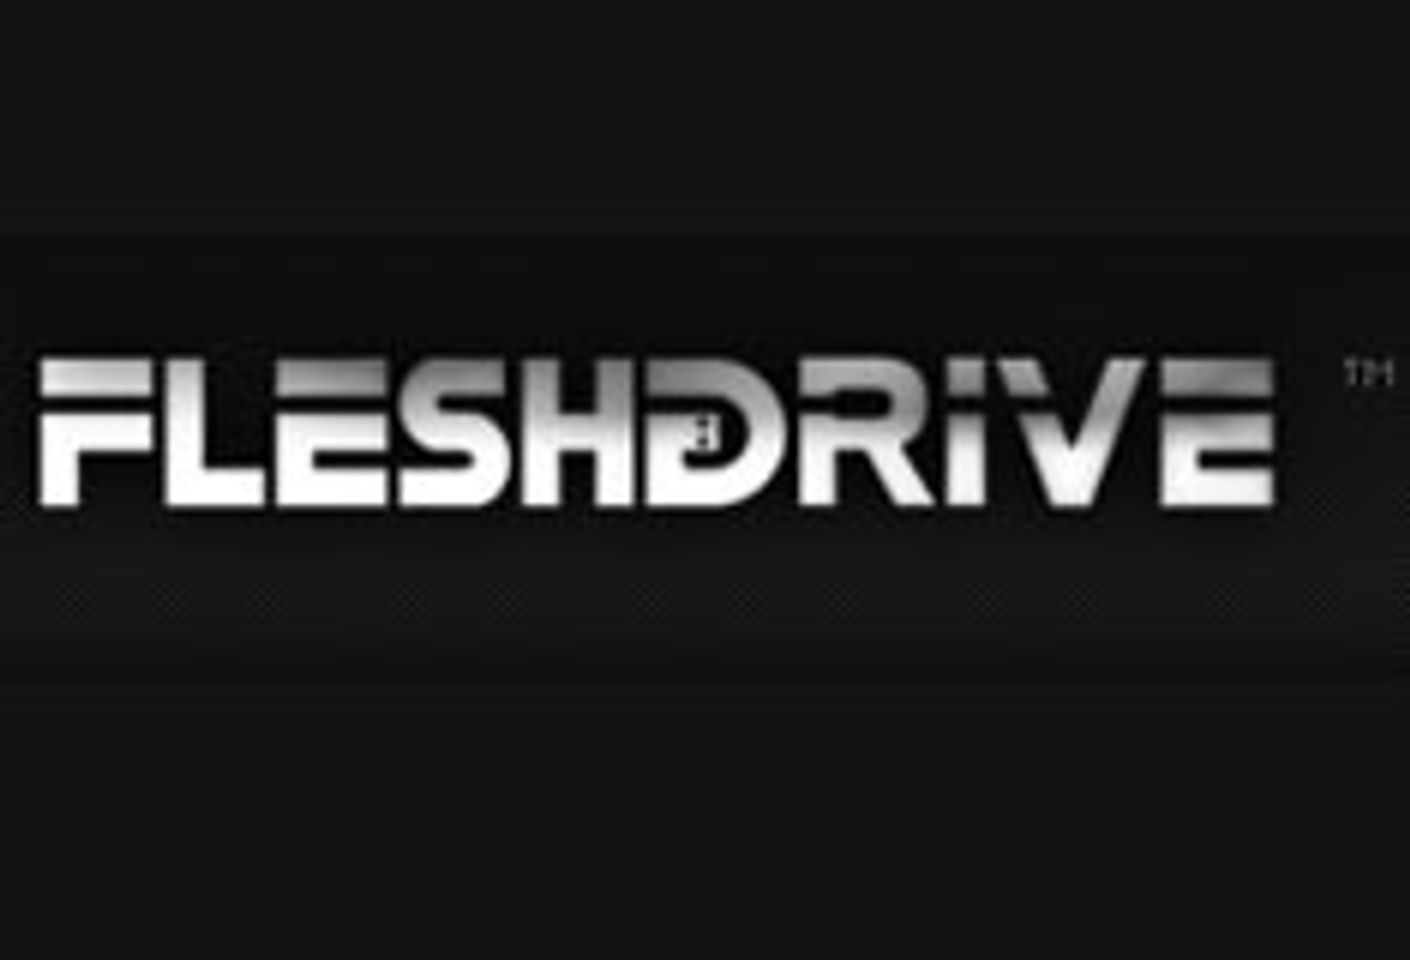 Flesh Drive Releases Mary Carey Drive from Legend